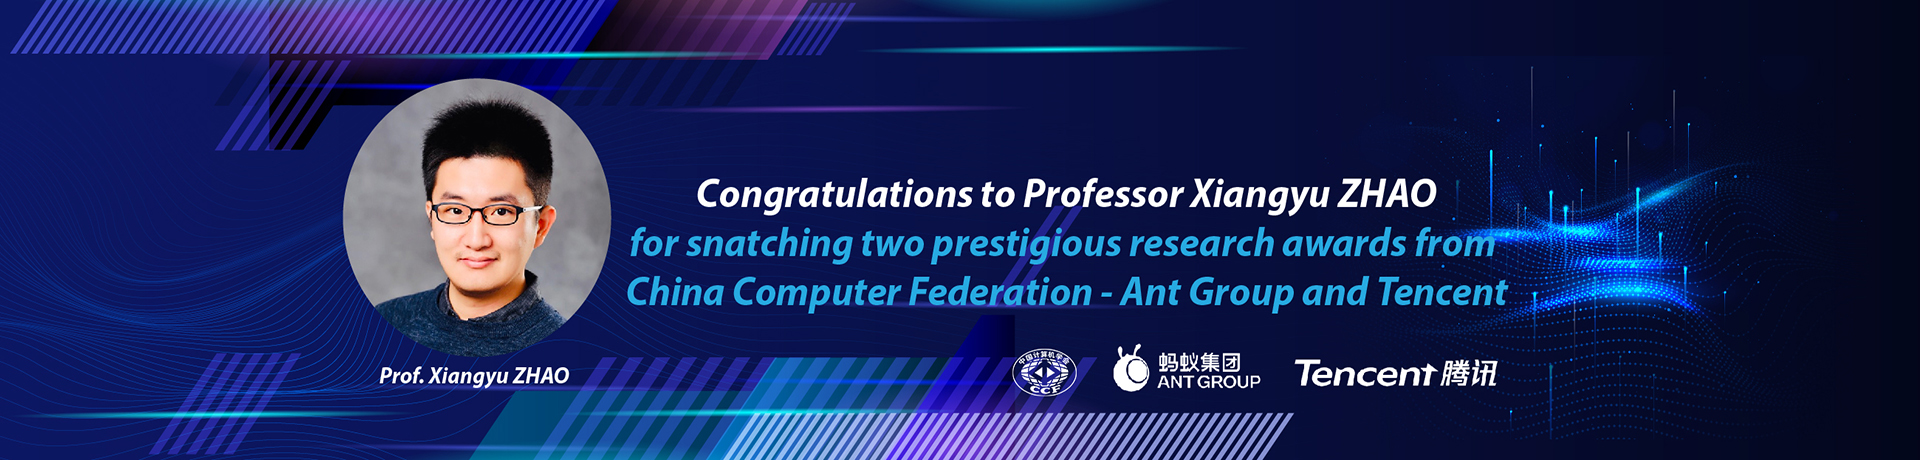 Professor Xiangyu ZHAO snatches two prestigious research awards from China Computer Federation - Ant Group and Tencent